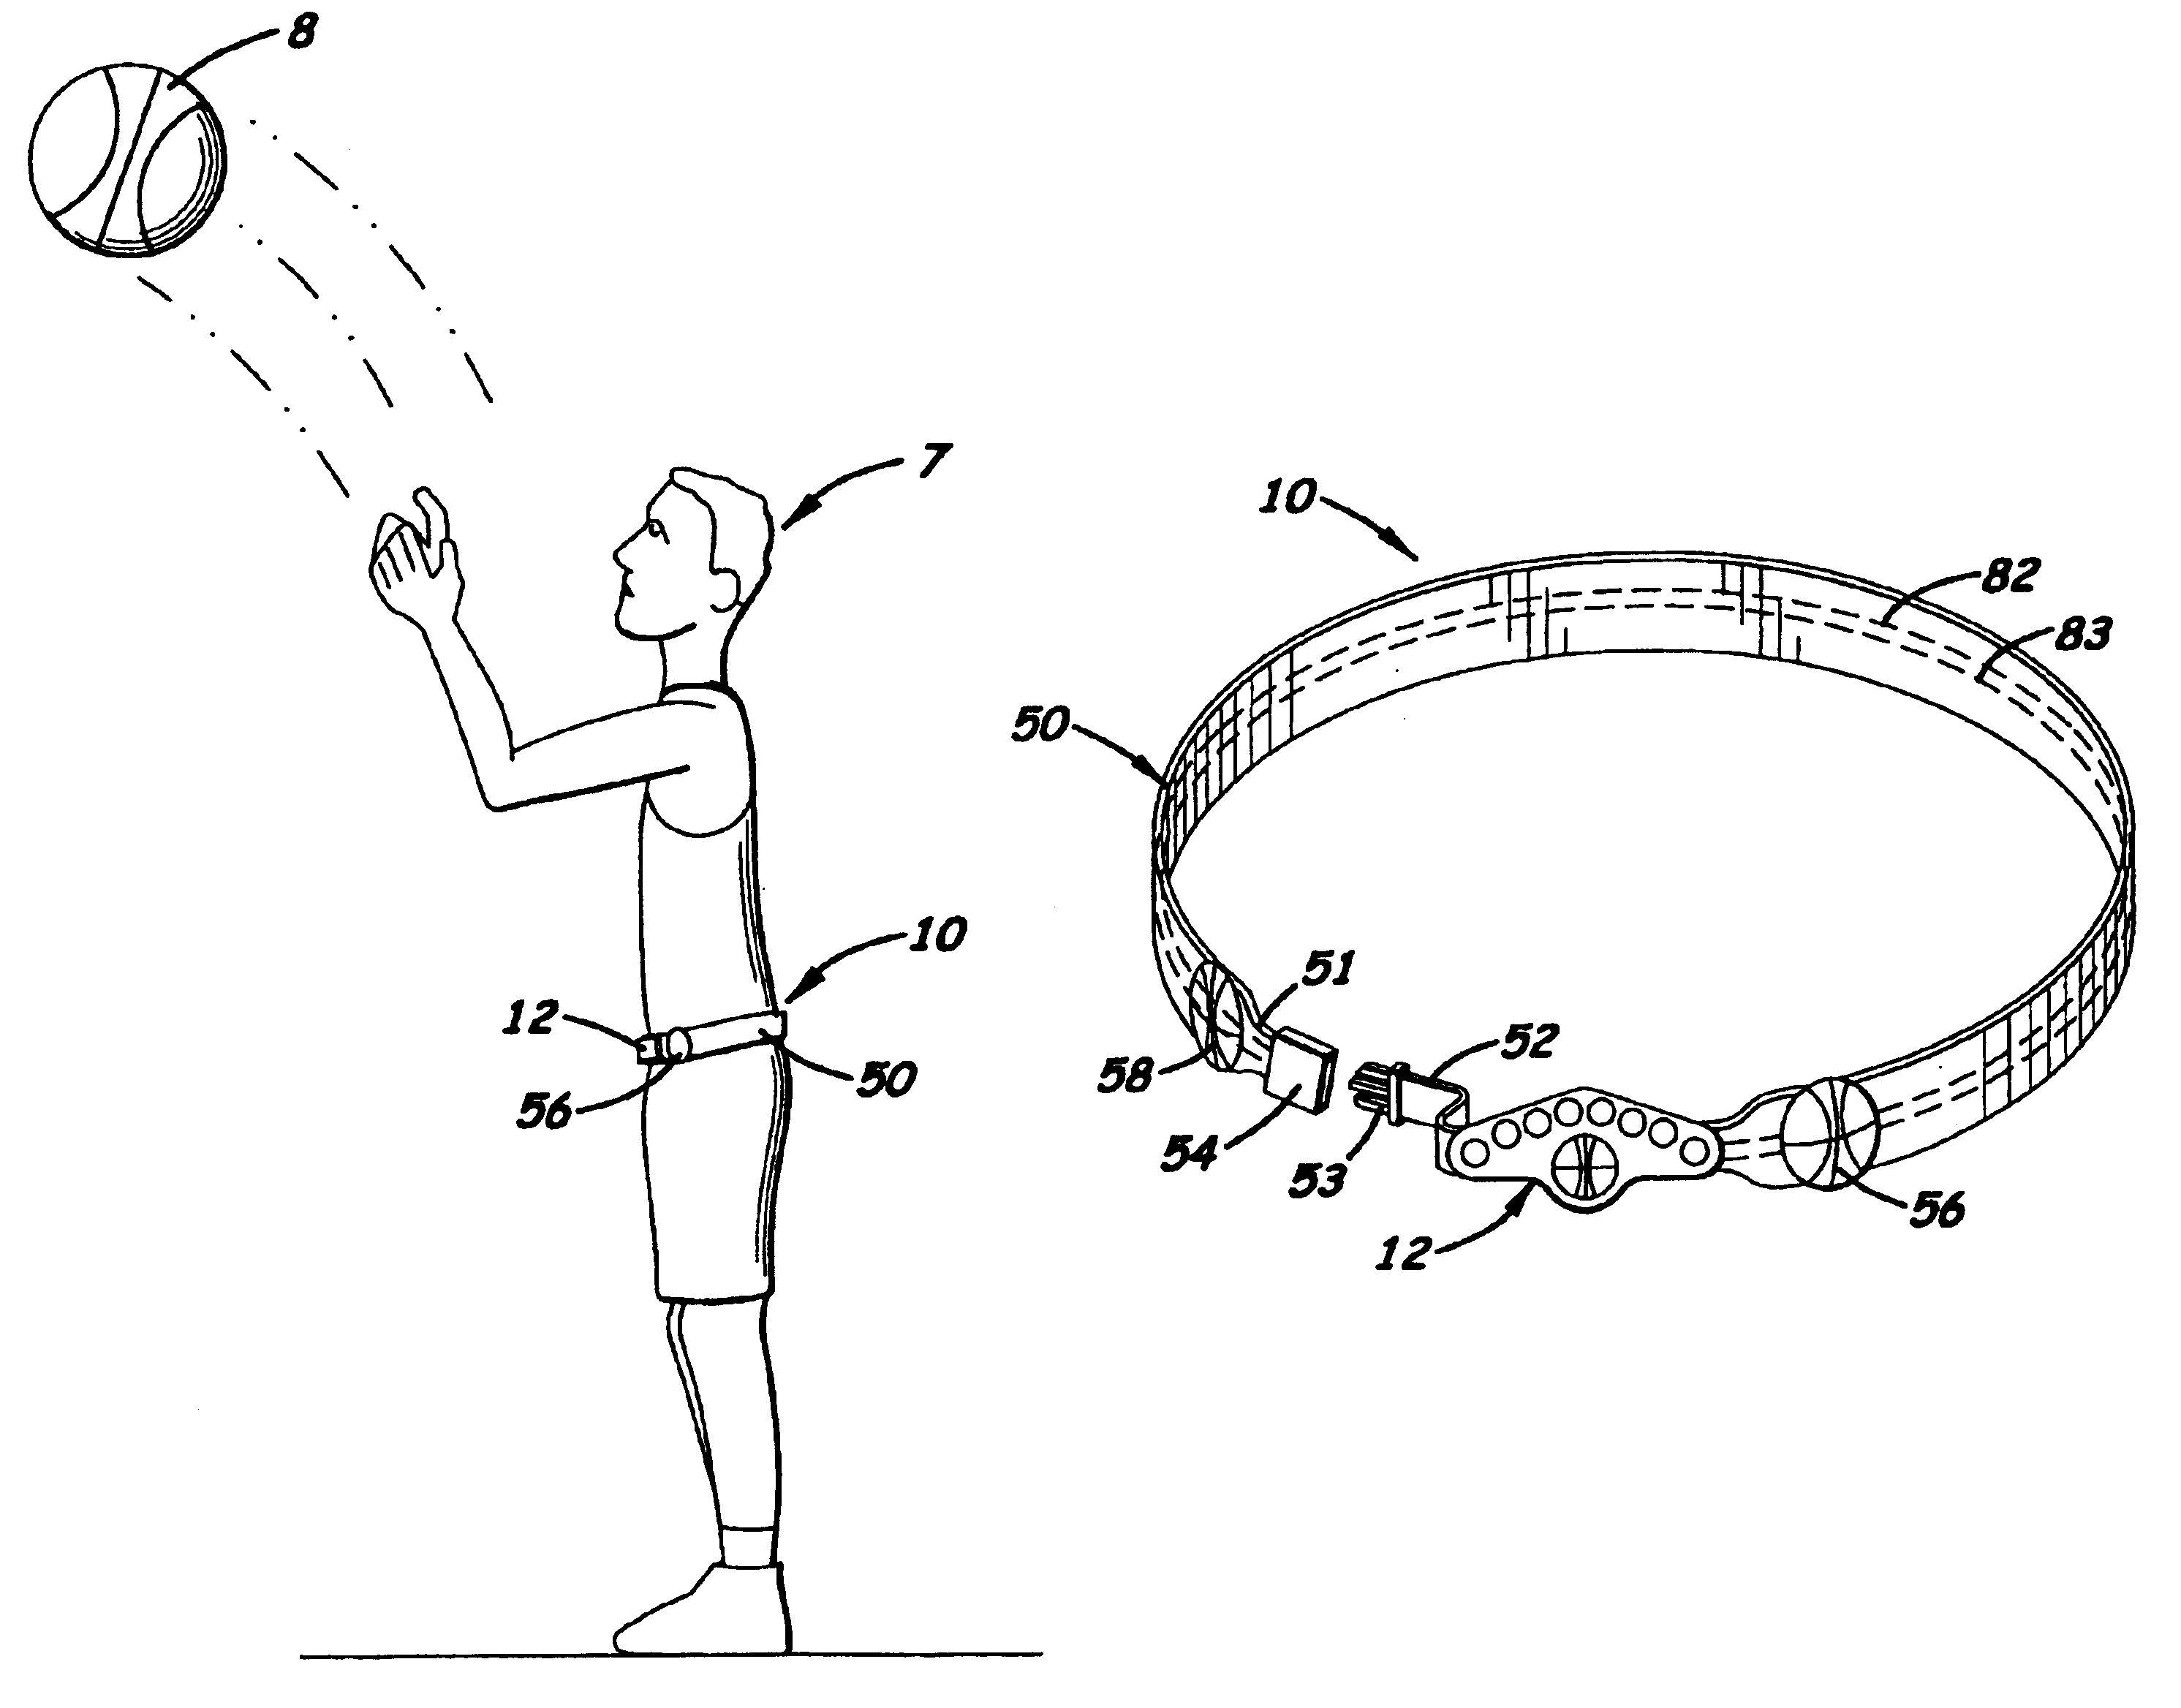 Basketball training and game device